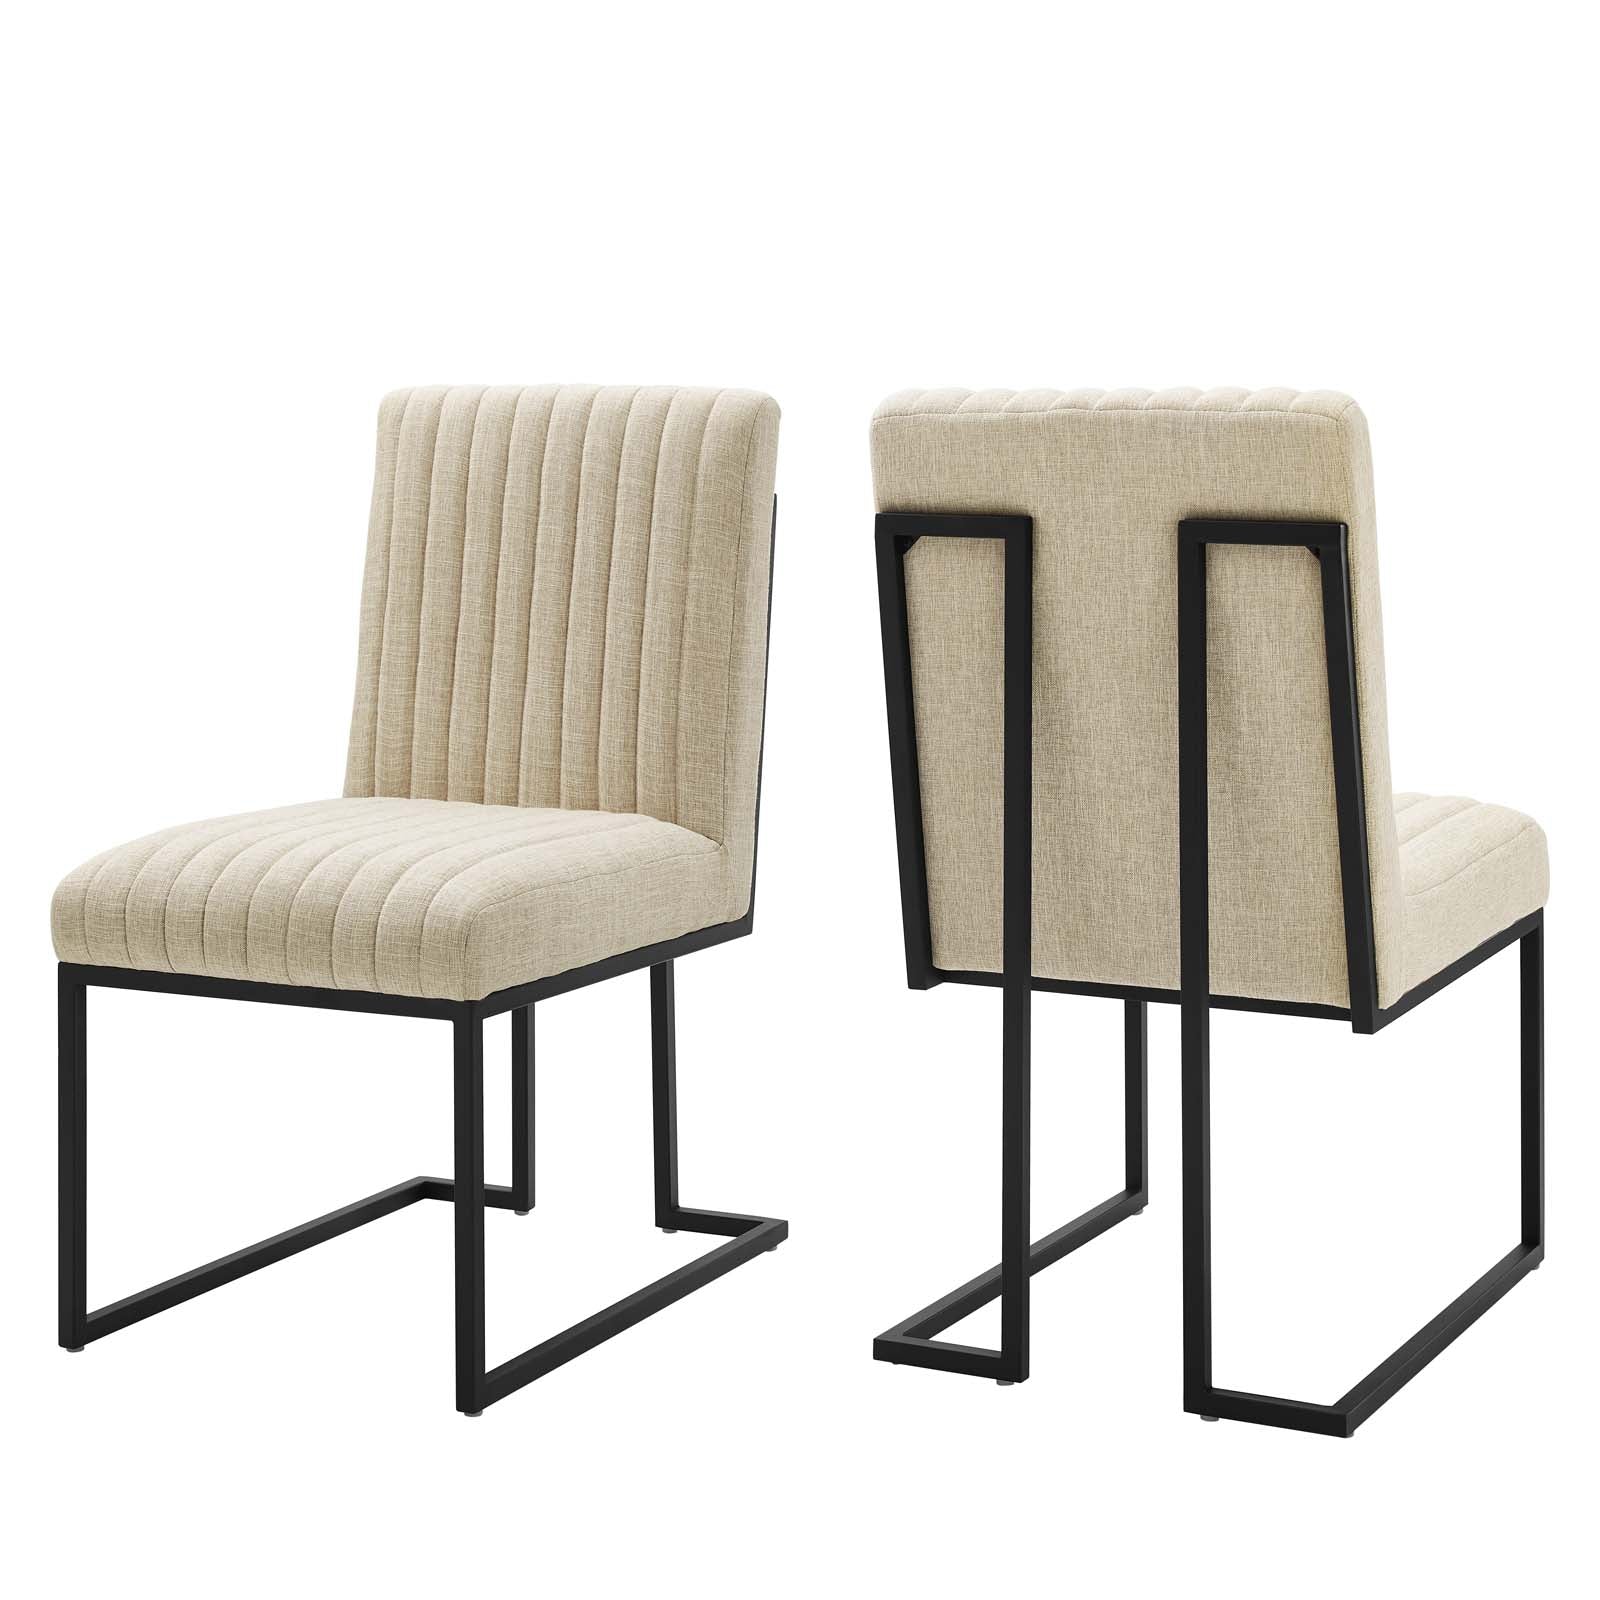 Modway Dining Chairs - Indulge Channel Tufted Fabric Dining Chairs - Set of 2 Beige